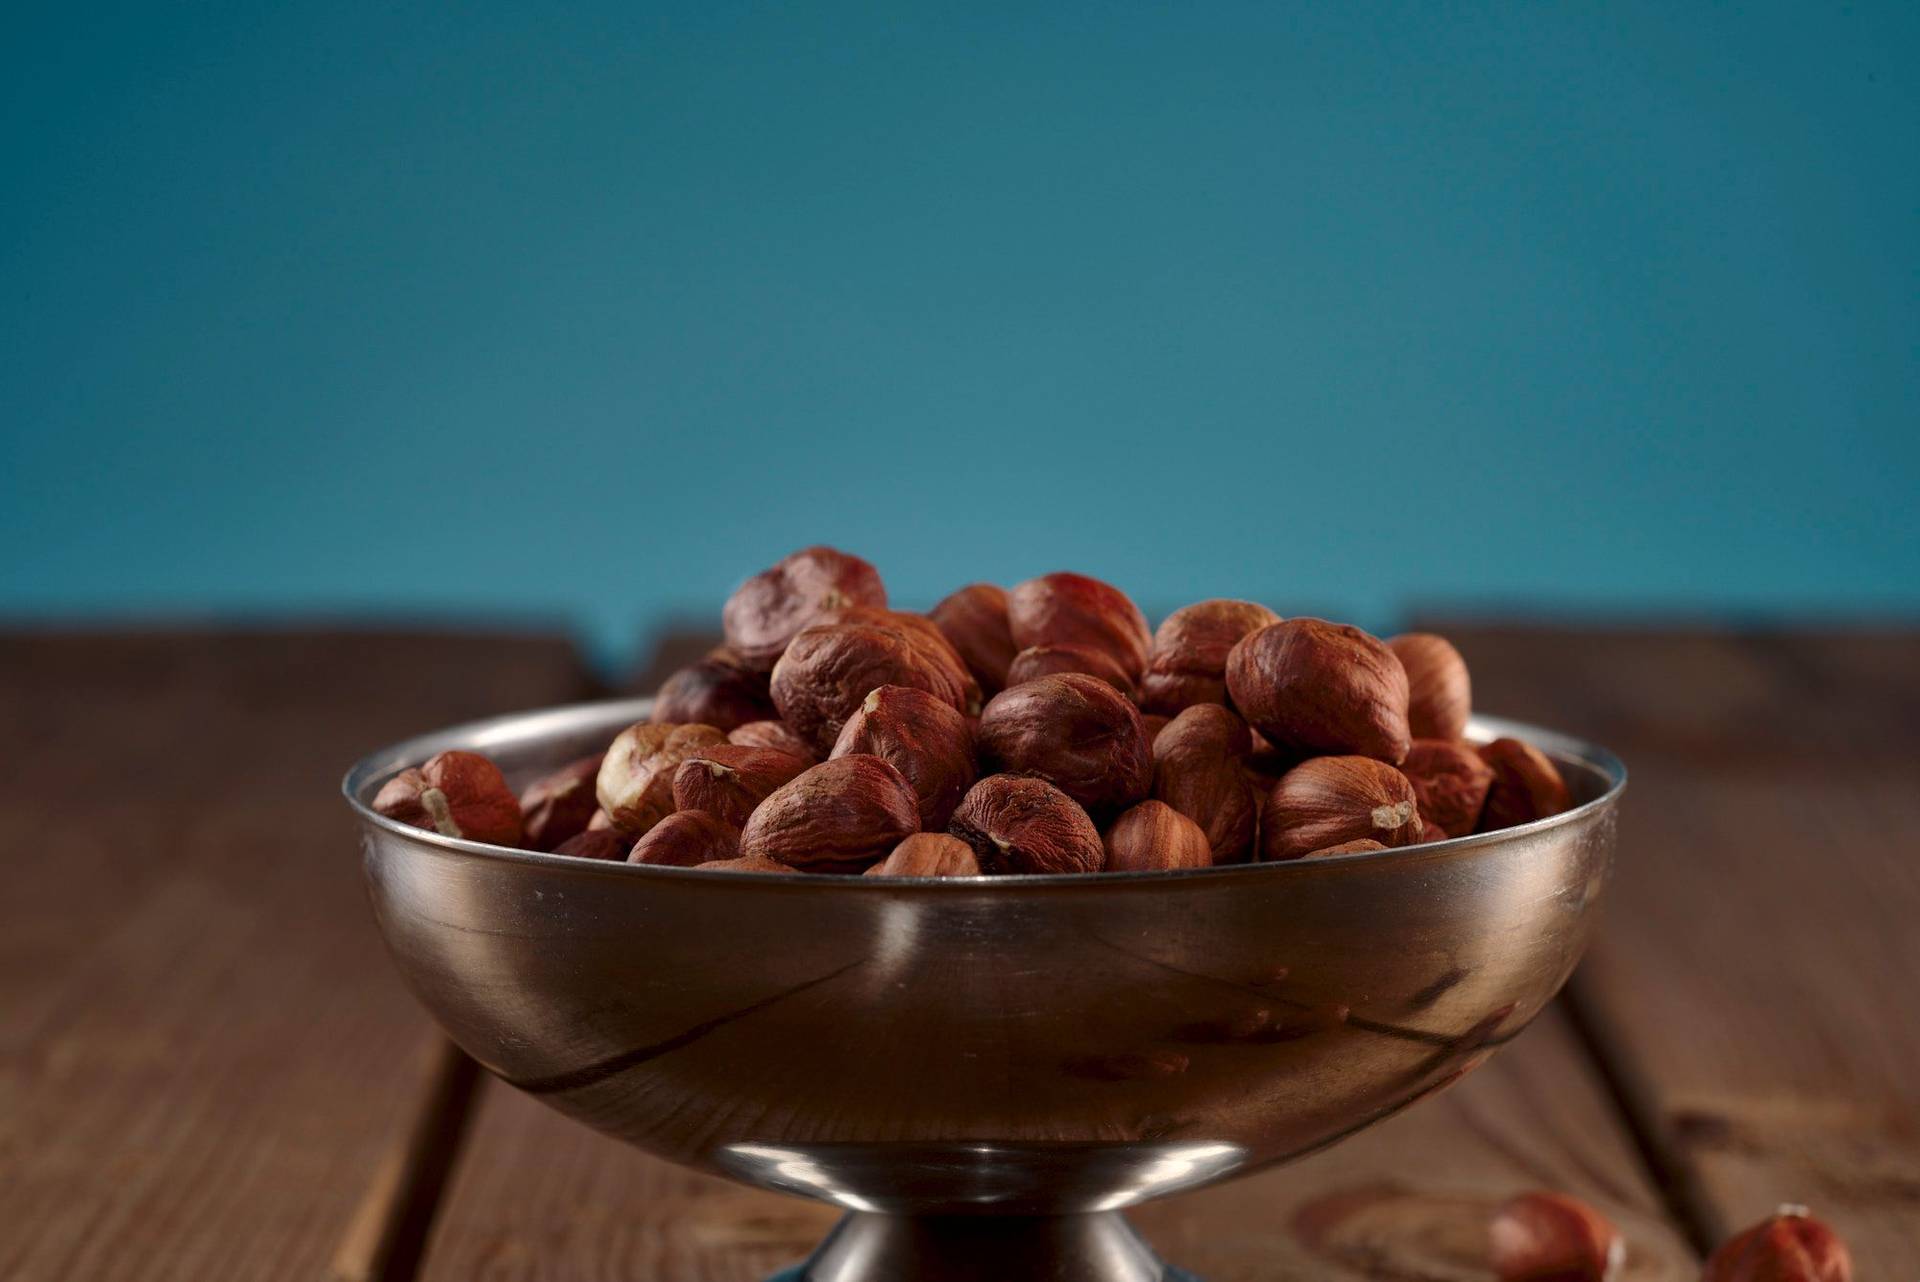 a silver bowl of hazelnuts with wooden table and blue background